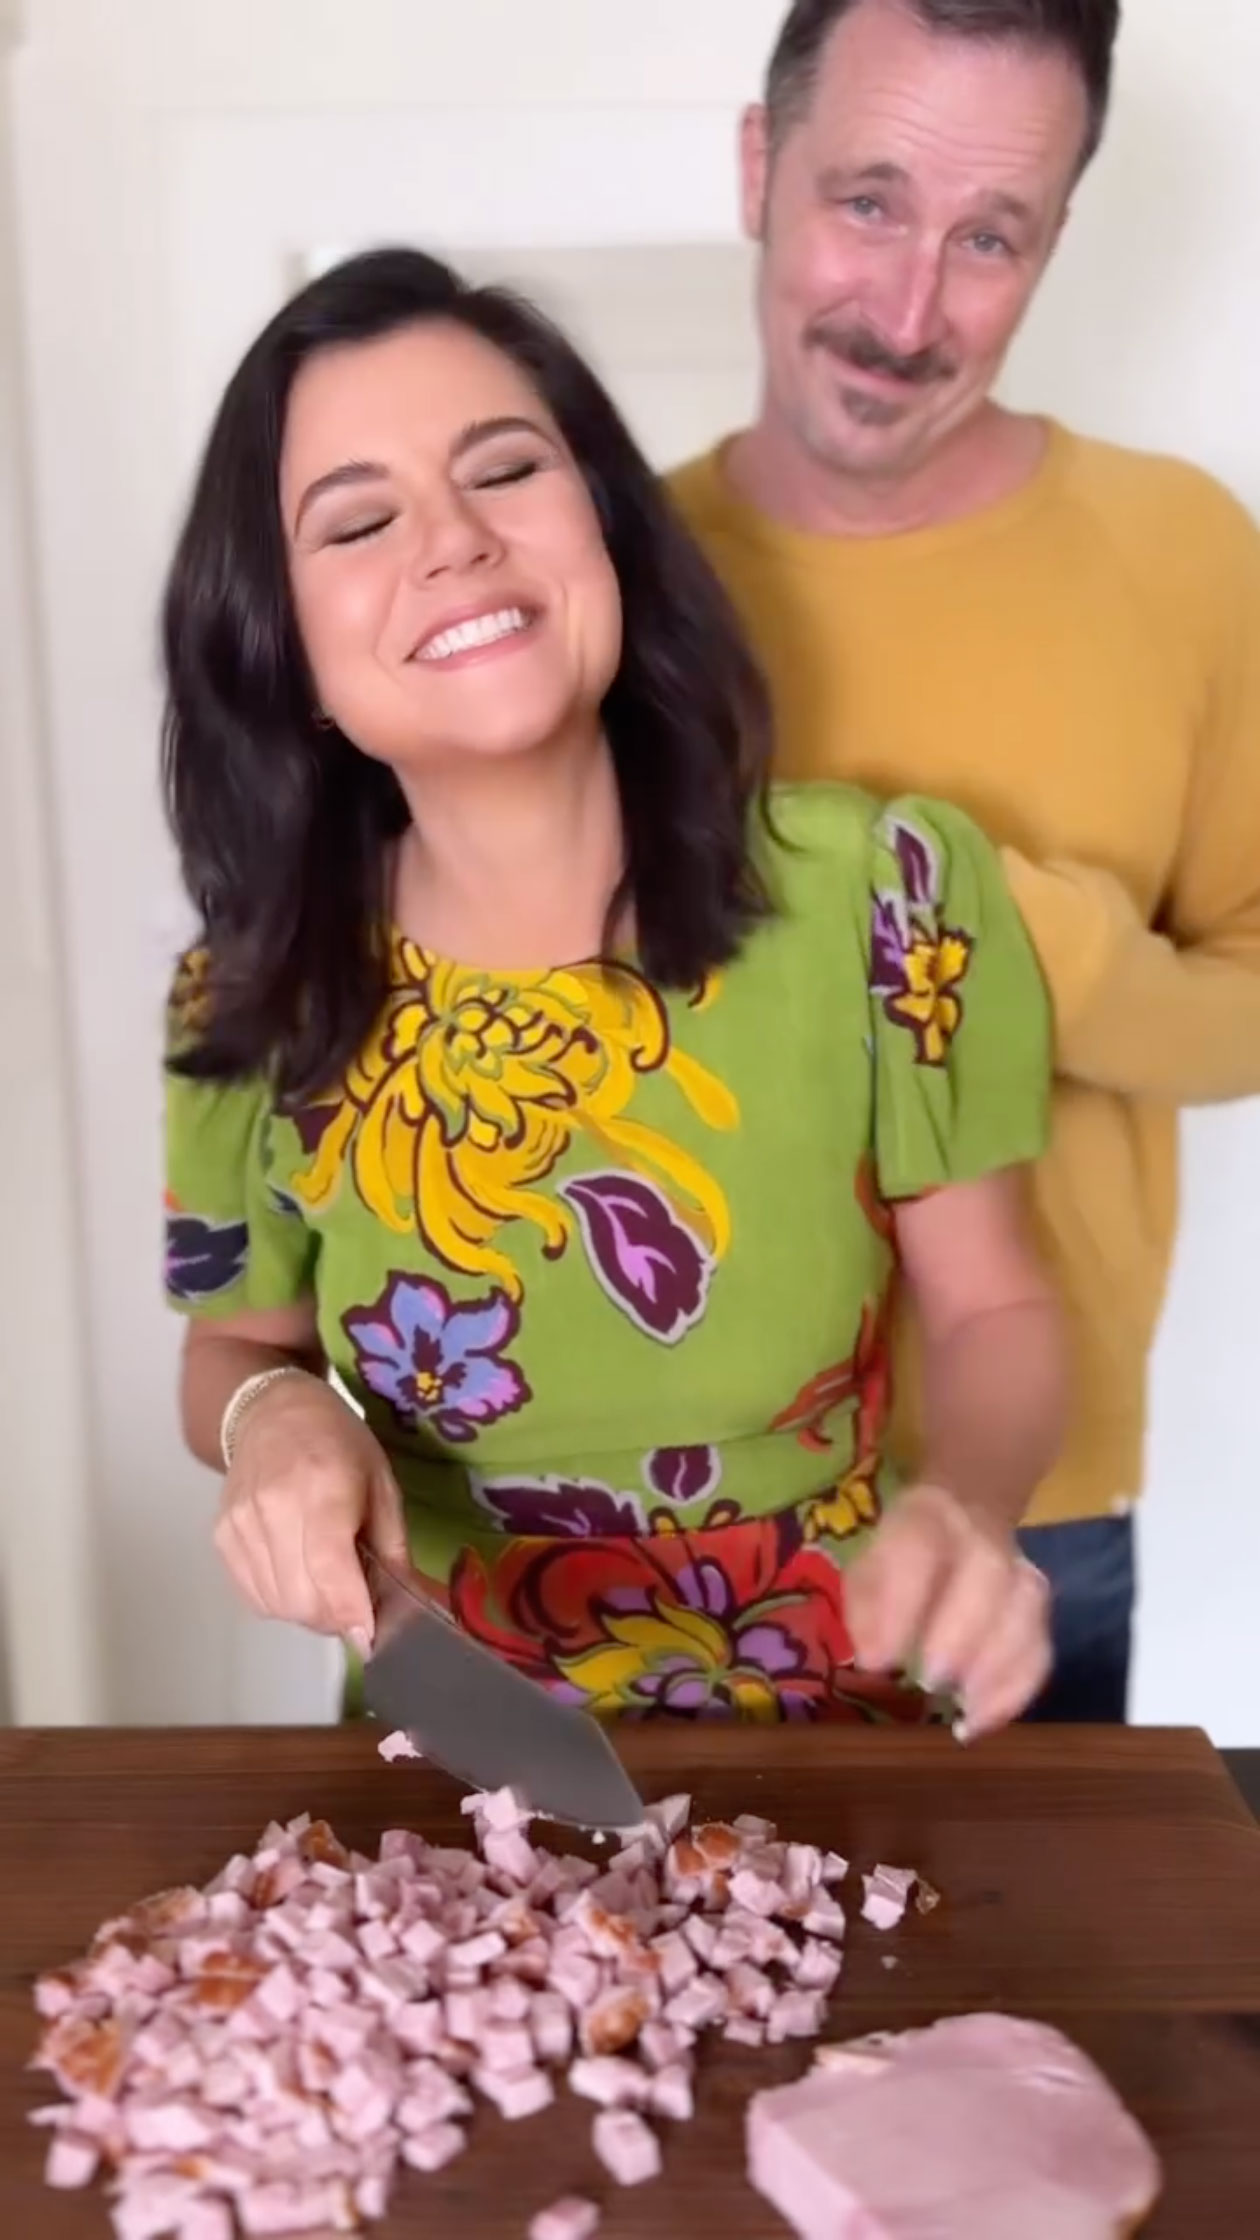 In the video, the Beverly Hills, 90210 actress was shown preparing the ham salad as her husband both distracted and assisted her